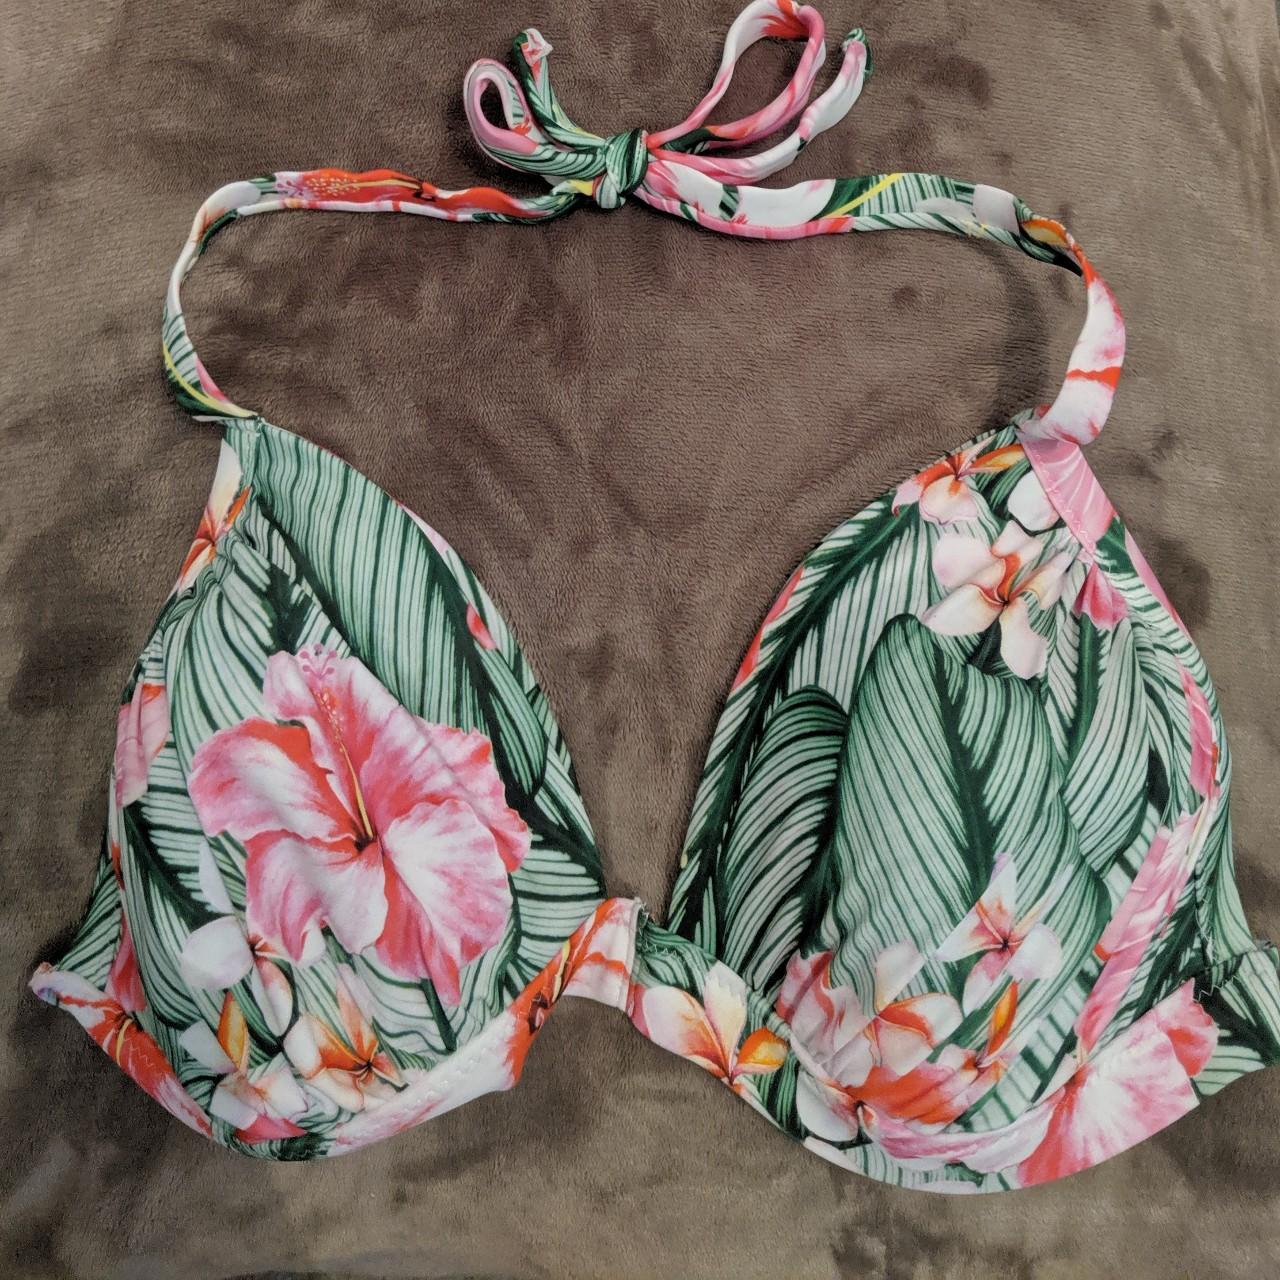 34g bikini top from ASOS. Very good condition only